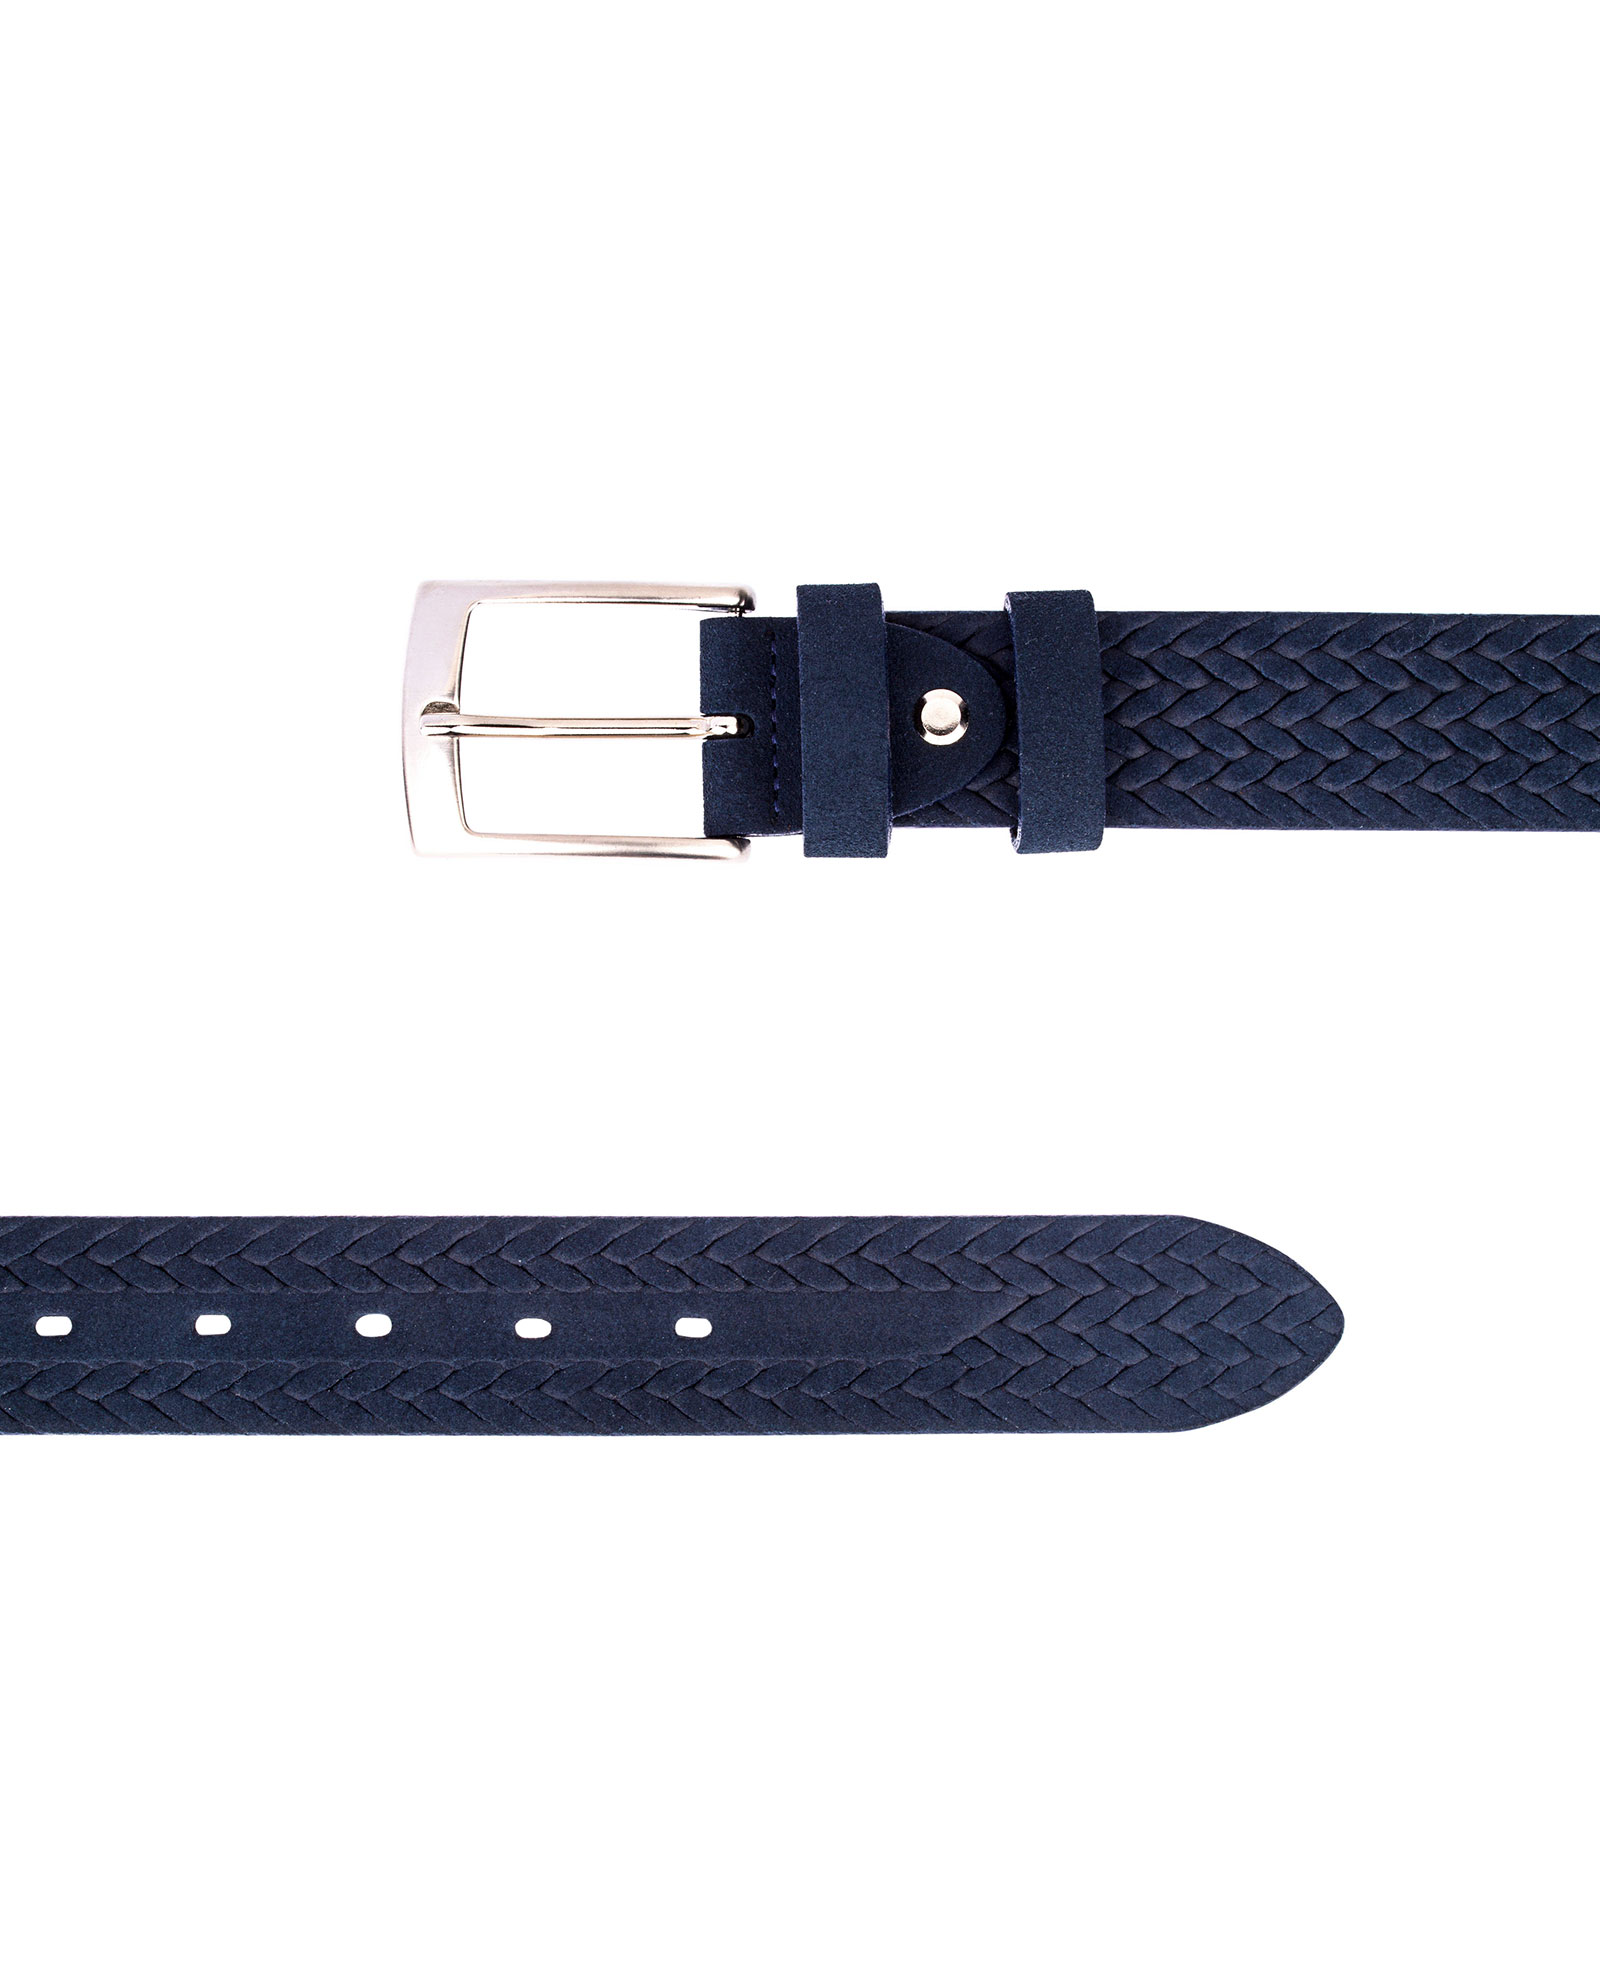 Buy Blue Suede Leather Belt | Woven Braided Emboss | Free Shipping